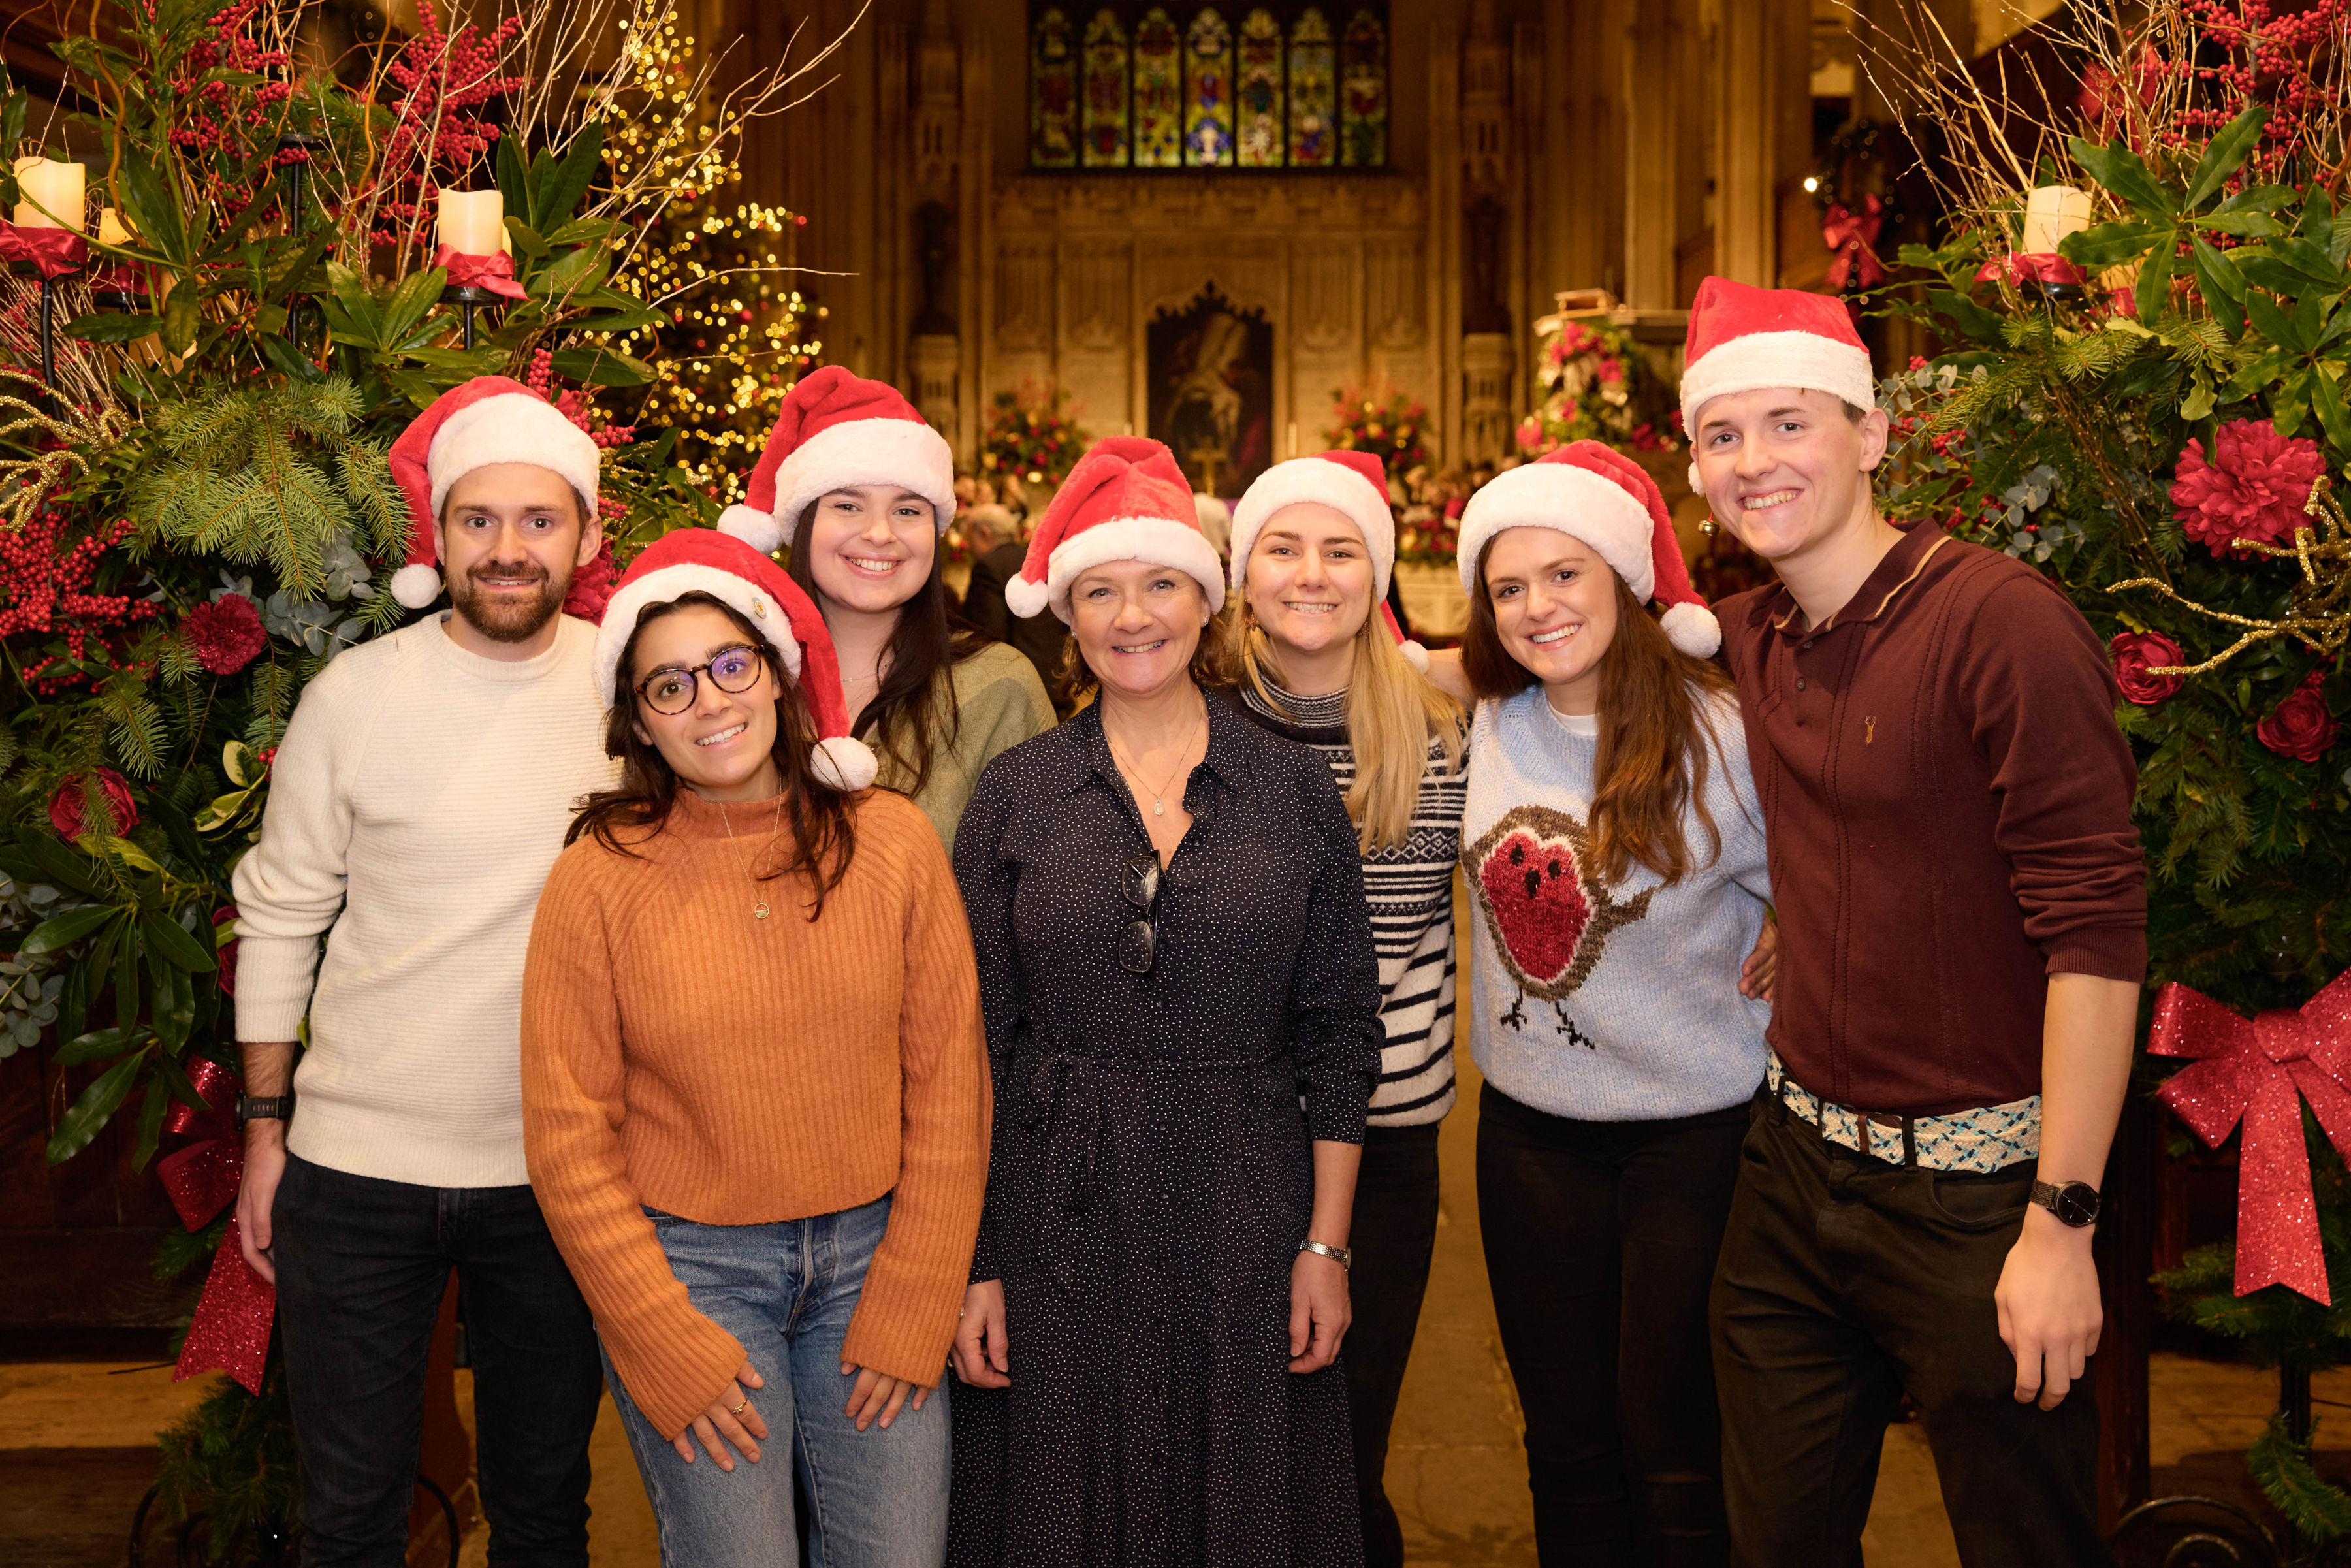 Seven dunnhumby staff and Helen Franks from CWT in church wearing red and white Christmas hats